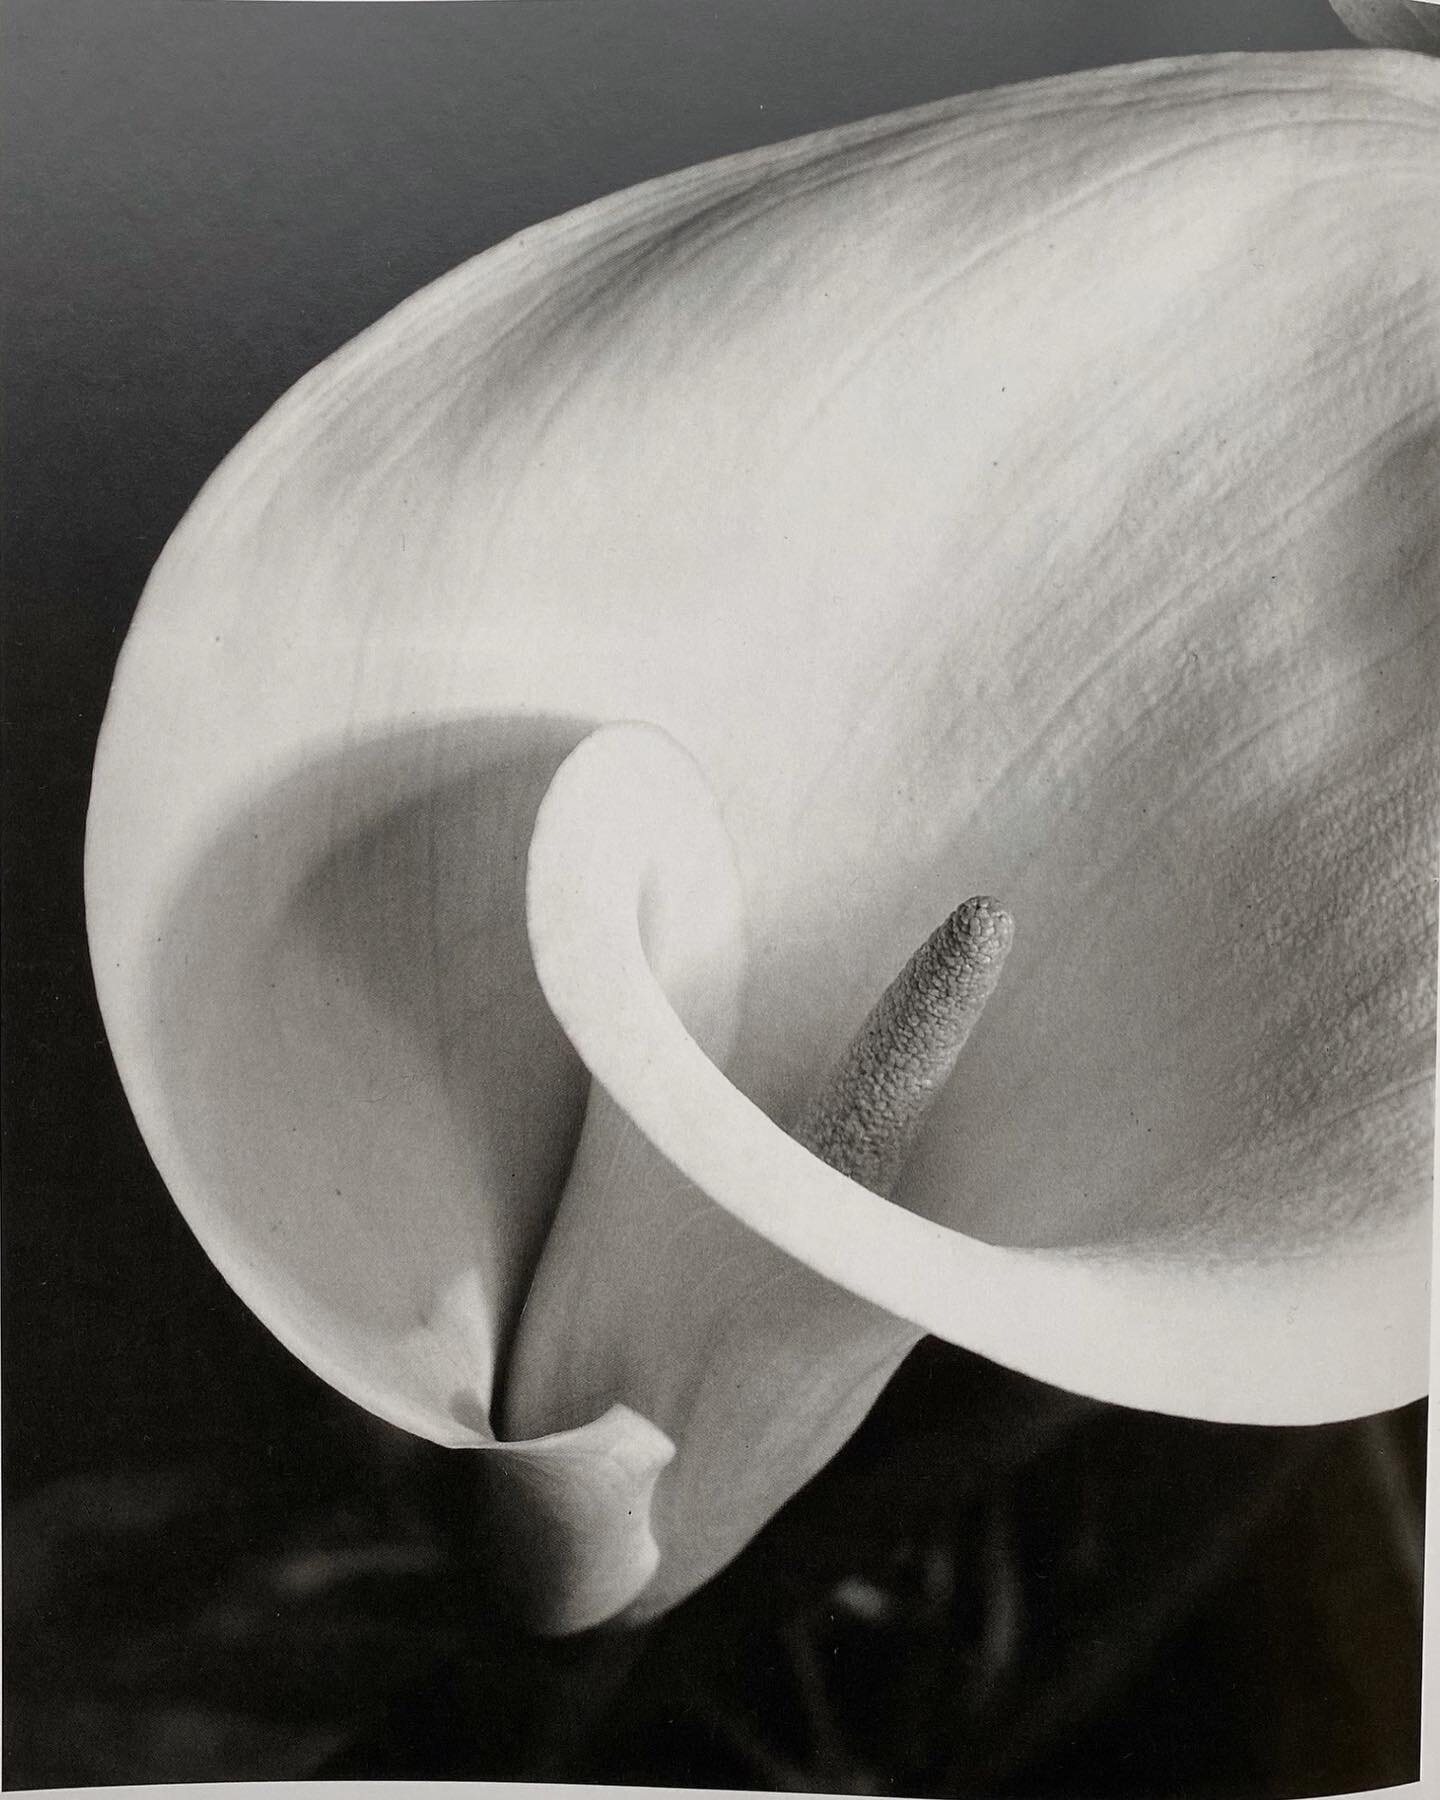 Imogen Cunningham

photographs ranging 1918 - 1972

from &lsquo;Flora&rsquo; edited in 1996, text by Richard Lorenz, curated by @paris_image_unlimited and available for purchase at Em Archives